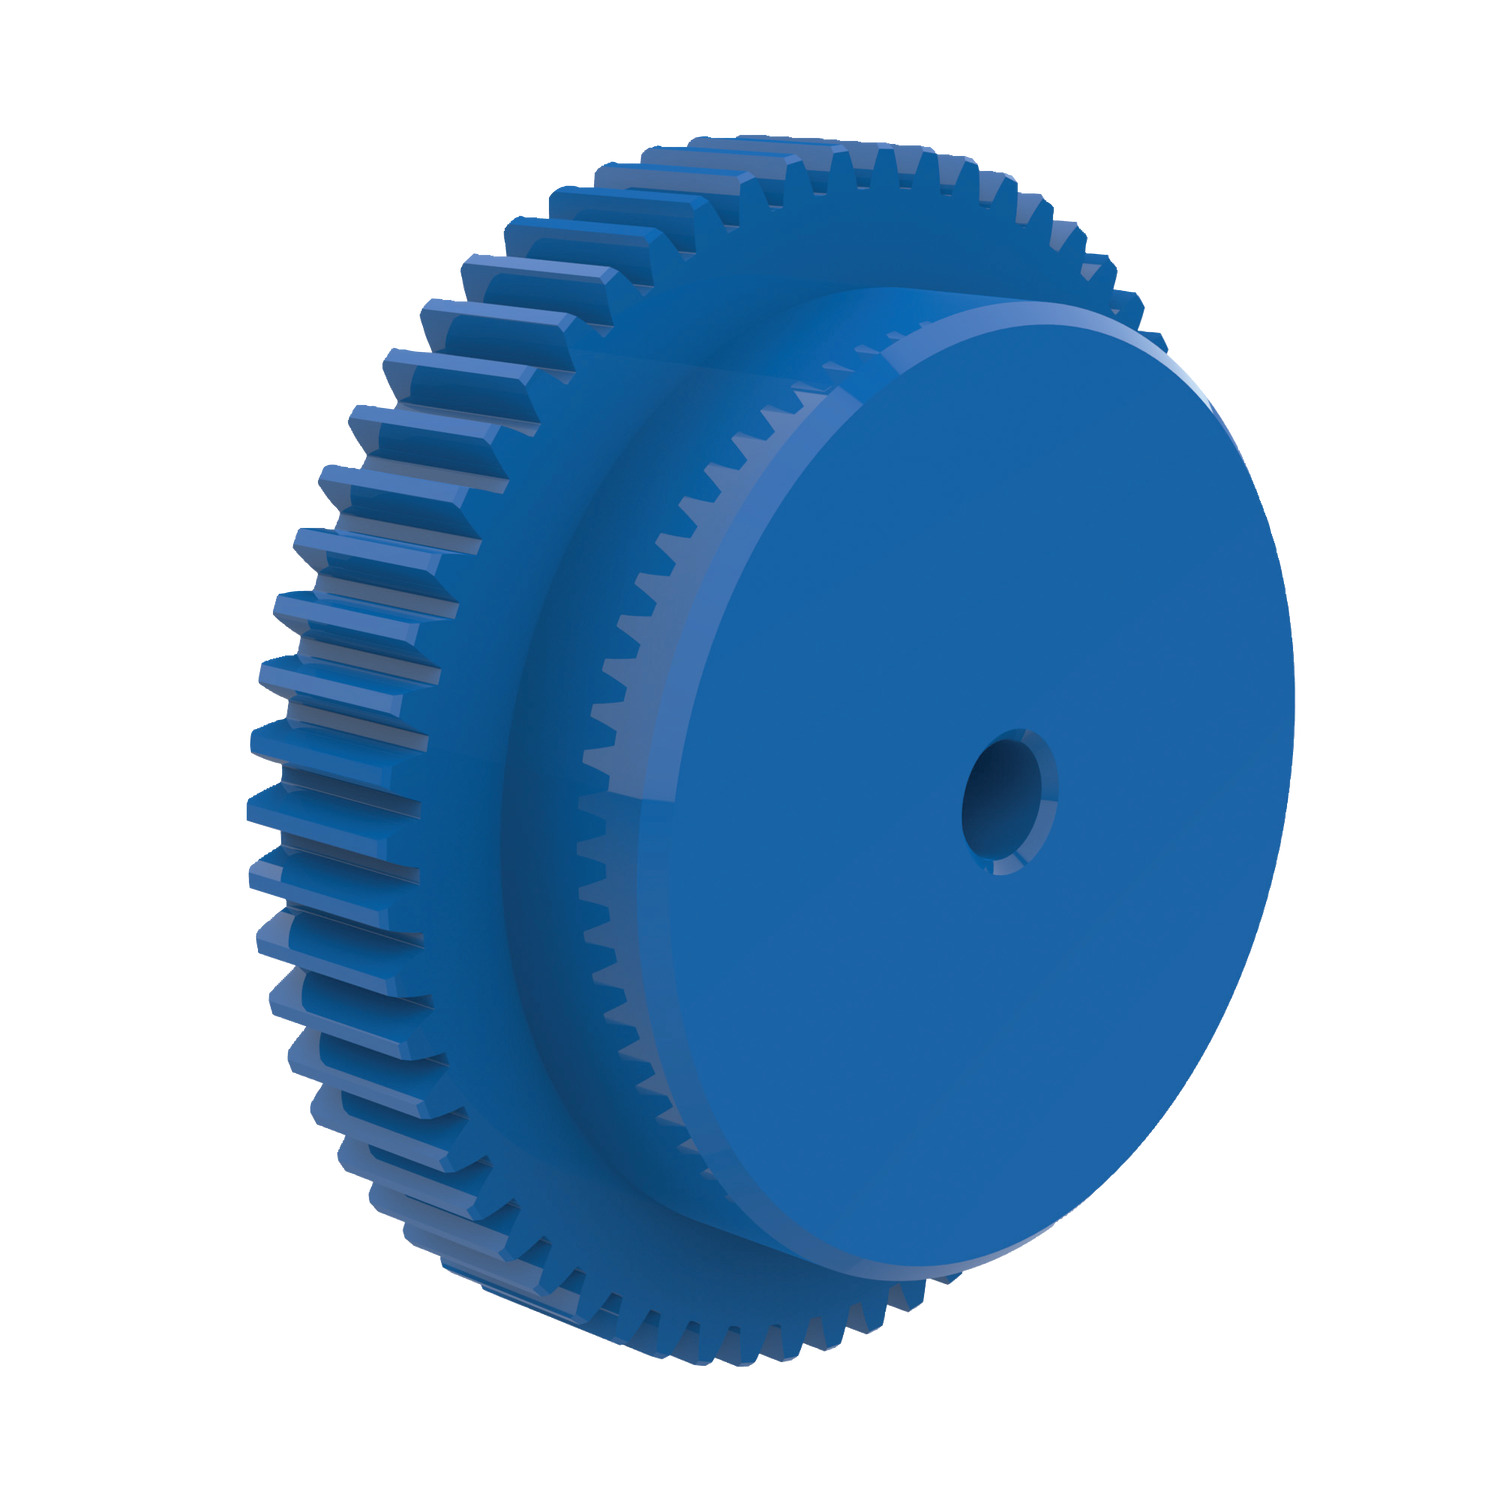 Spur Gears - Module 0.5 - Plastic These special blue, machined thermoplastic (polyacetal/POM) Spur Gears with 14-120 teeth, are approved for use in the food and drink industries. The blue colour is easily detected by food scanning devices (which scan for foreign objects contaminating the foodstuff).